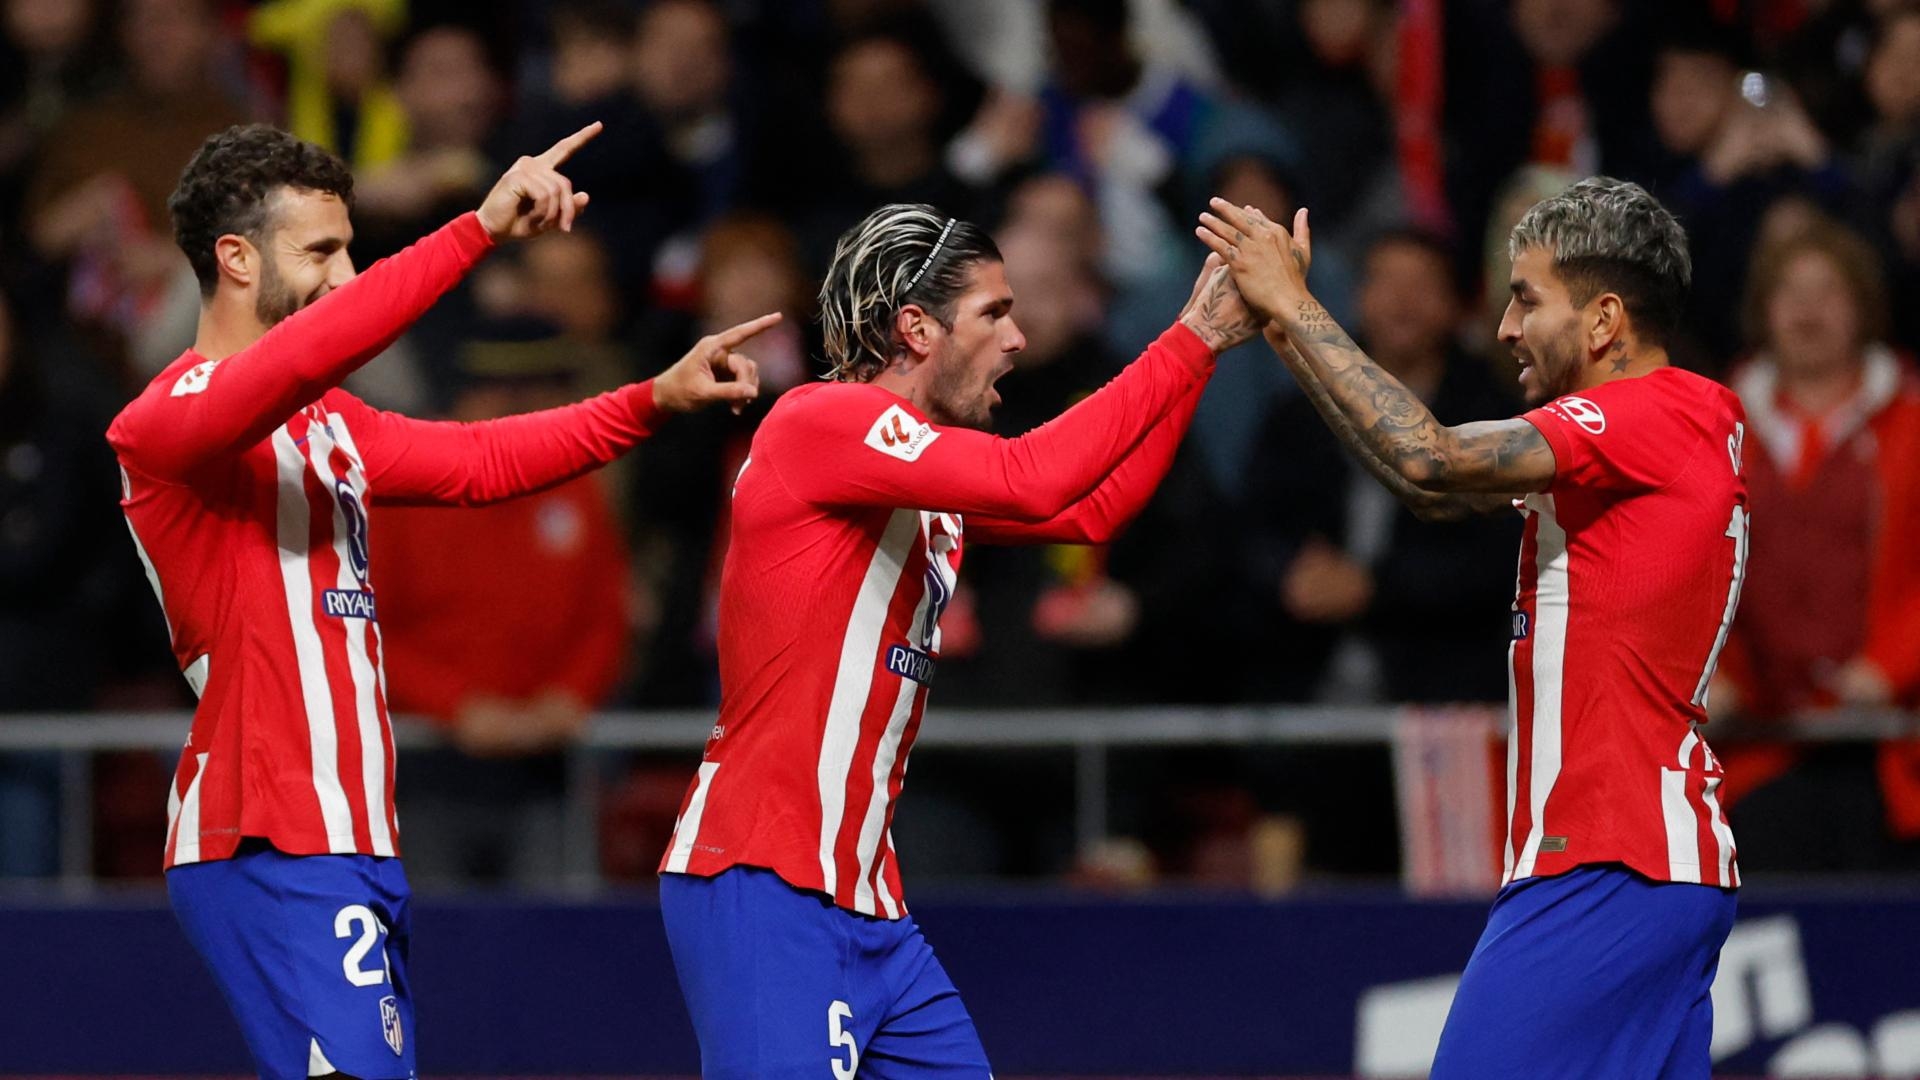 Atletico Madrid holds grip on top 4 as they take down Athletic Club